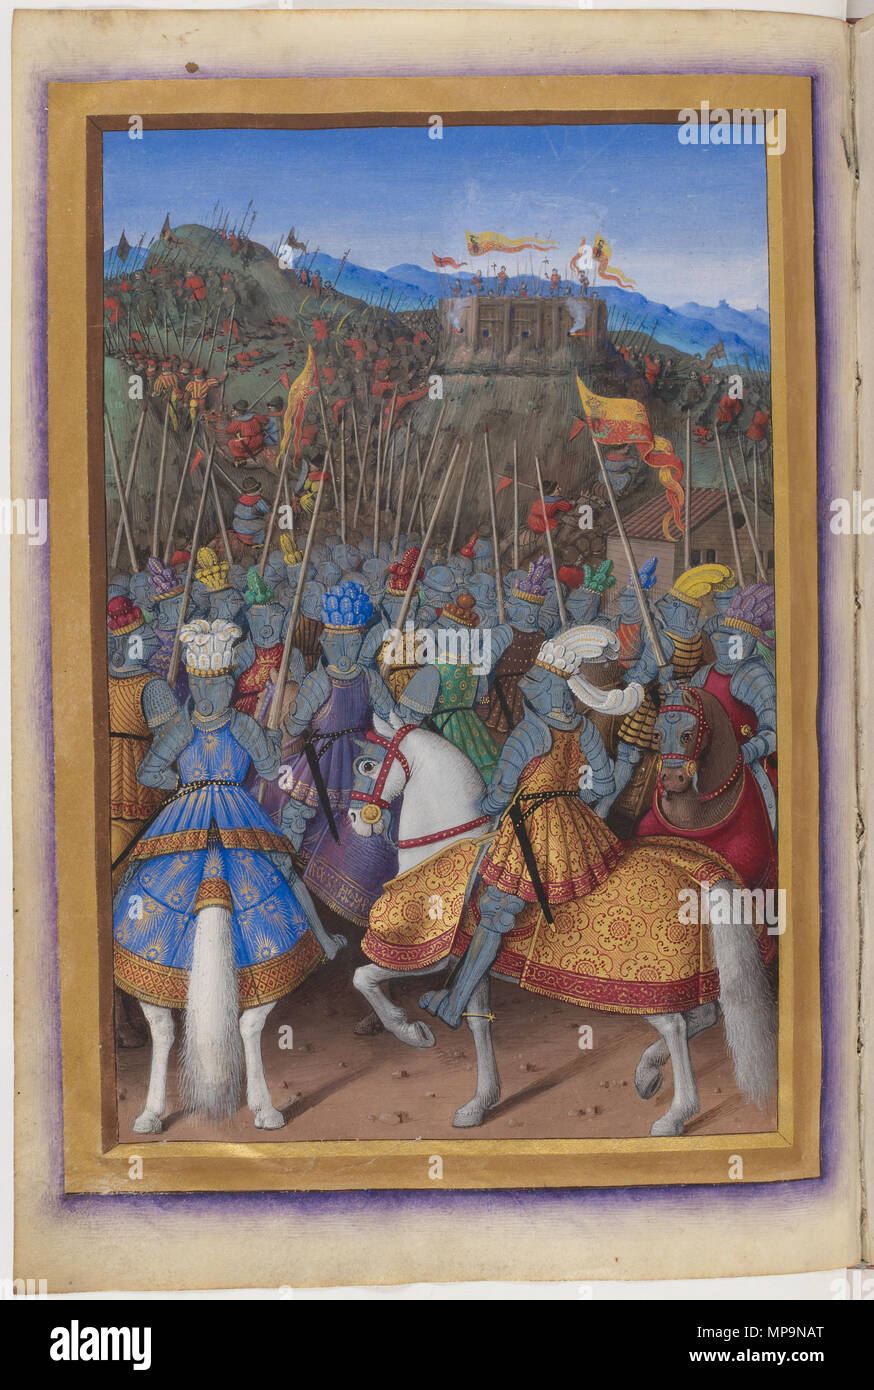 Français : Le Voyage de Gênes .  English: Louis XII and his army attack a fortress and defeat the Genoese army. The tunic of the King and the trappings of his horse are more emblematic. Only the white tuft of the crest and the position of the horse identify the king. Français : Louis XII et son armйe attaquent une forteresse et dйfont l'armйe gкnoise. La tunique du roi et le caparaзon de son cheval ne sont plus emblйmatiques. Seule la houppe blanche du cimier ainsi que la position du cheval permettent d'identifier le roi. . circa 1500-1520.   824 Louis XII defeats the Genoese Stock Photo